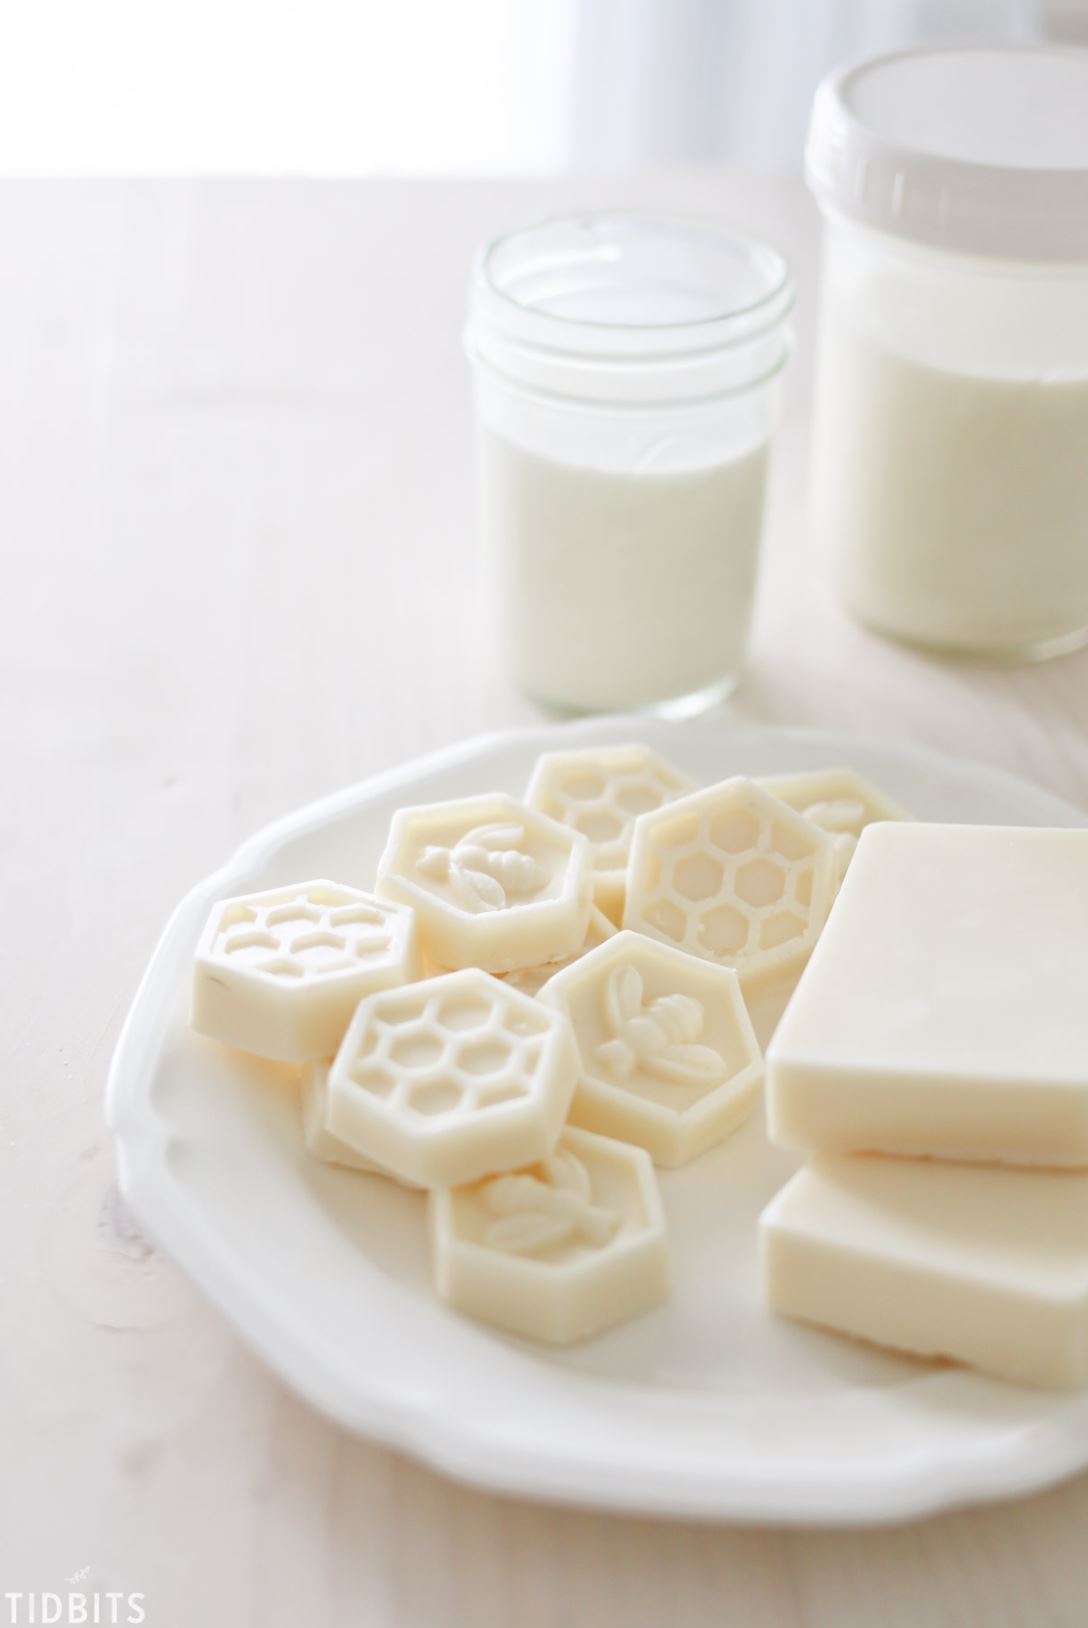 Small cream-colored honeycomb shaped soaps made from goat's milk and honey.